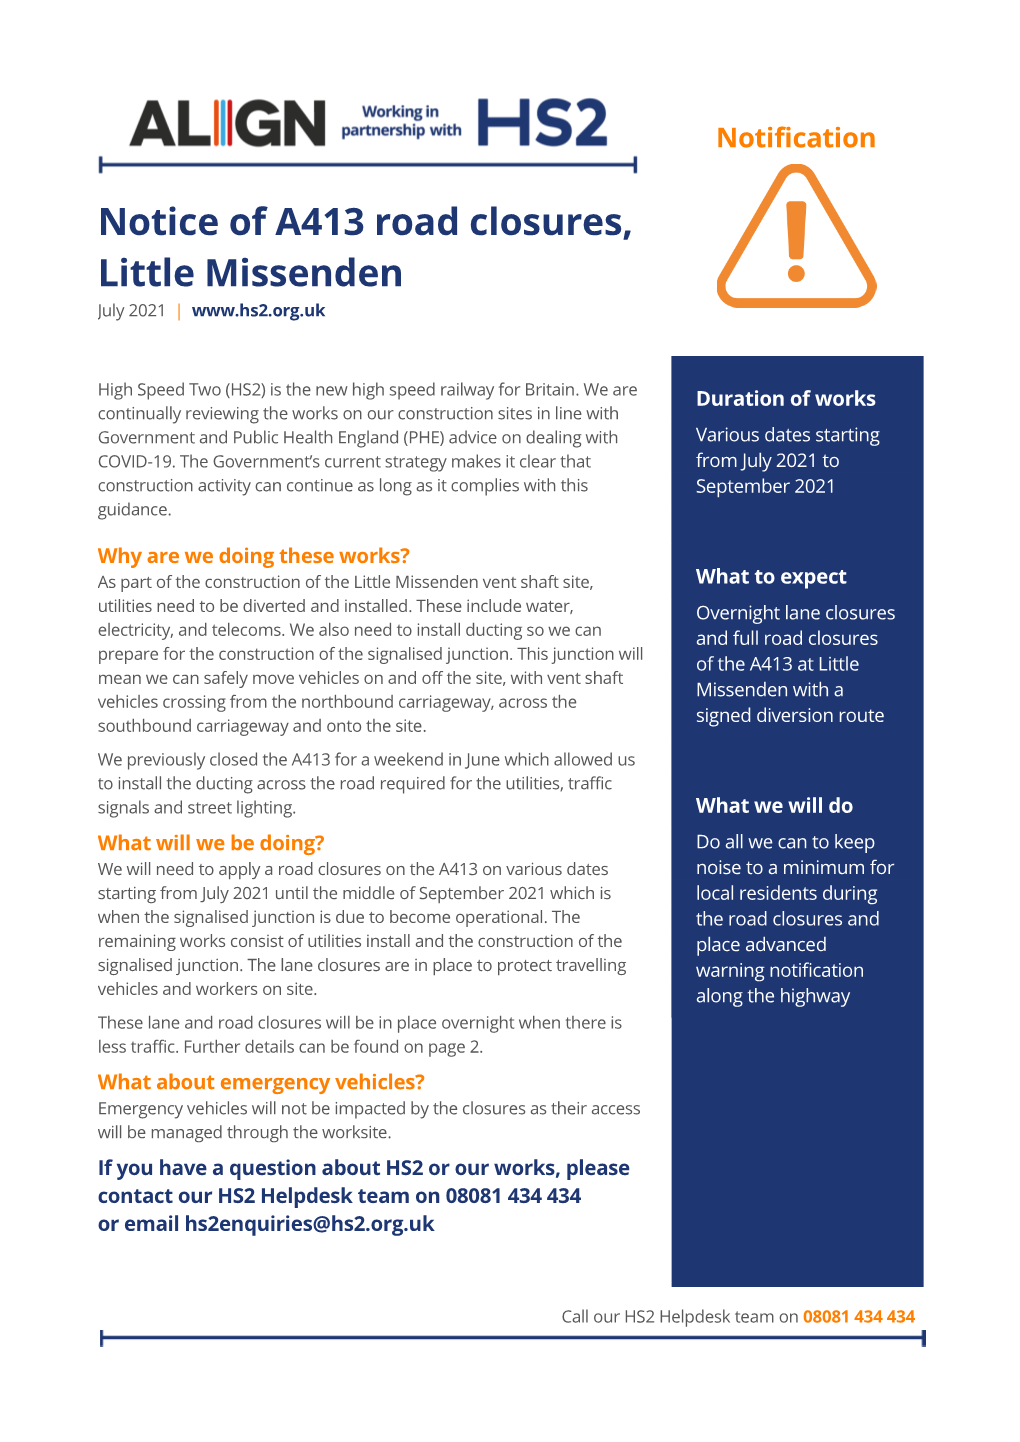 Notice of A413 Road Closures, Little Missenden July 2021 |